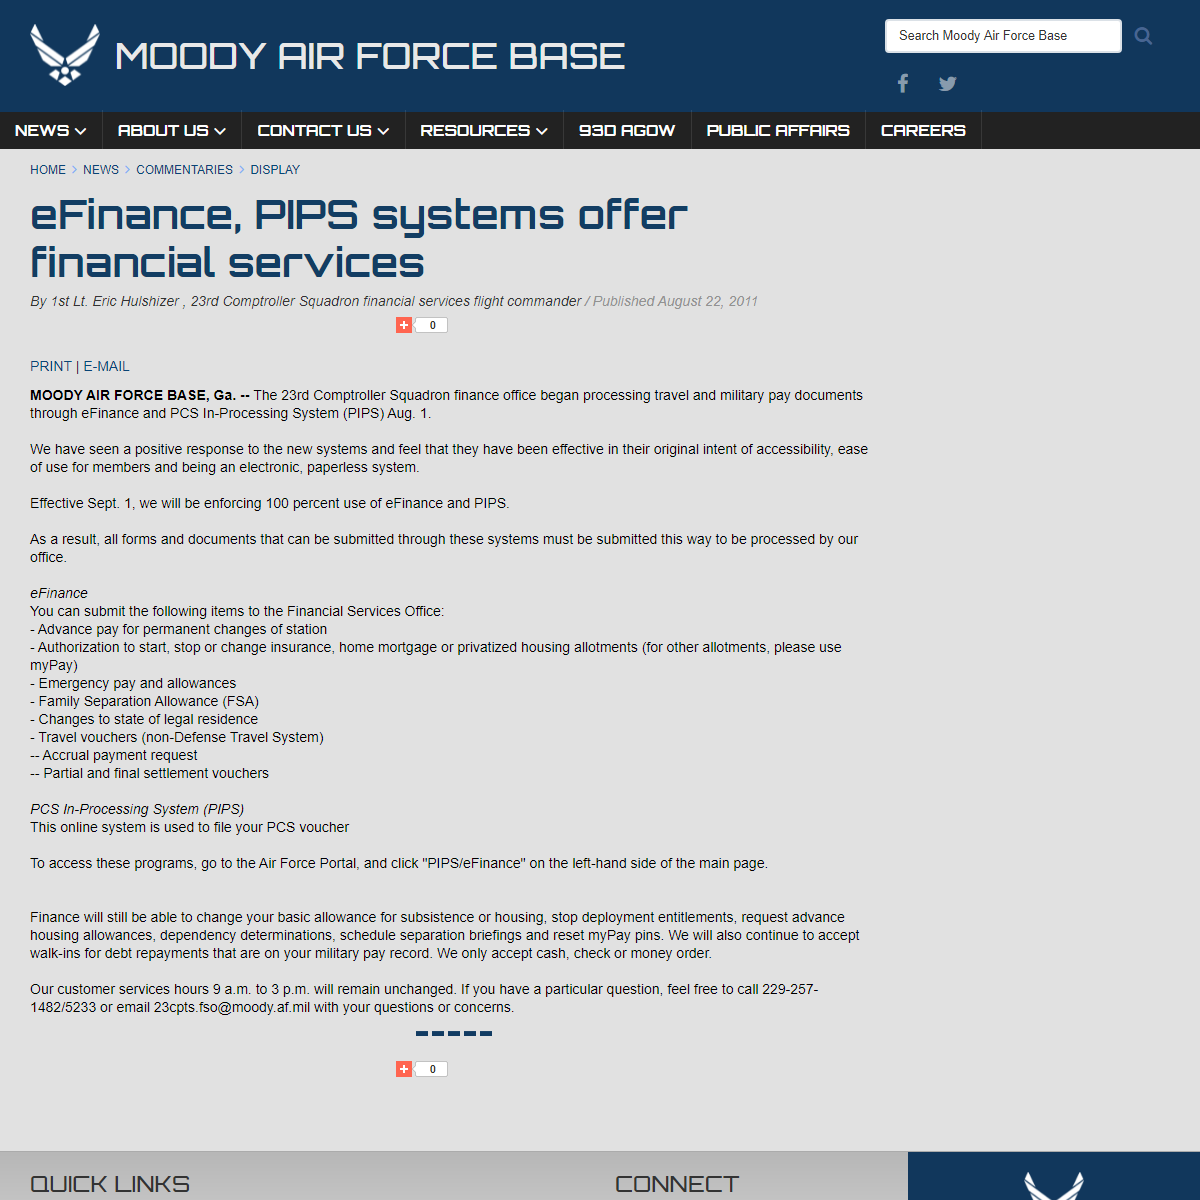 A complete backup of https://www.moody.af.mil/News/Commentaries/Display/Article/212169/efinance-pips-systems-offer-financial-ser